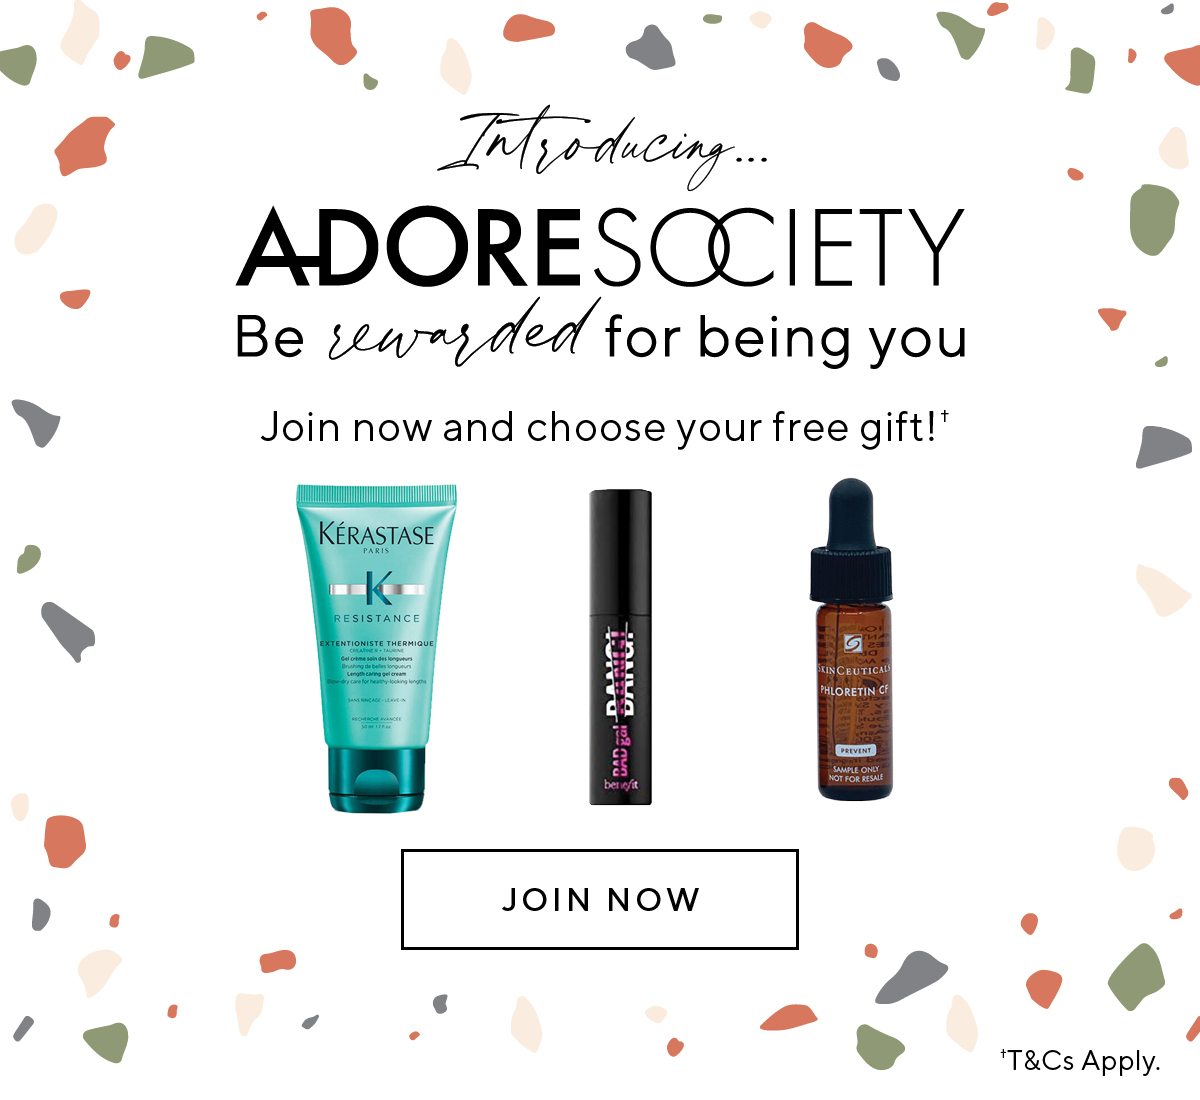 Join Adore Society